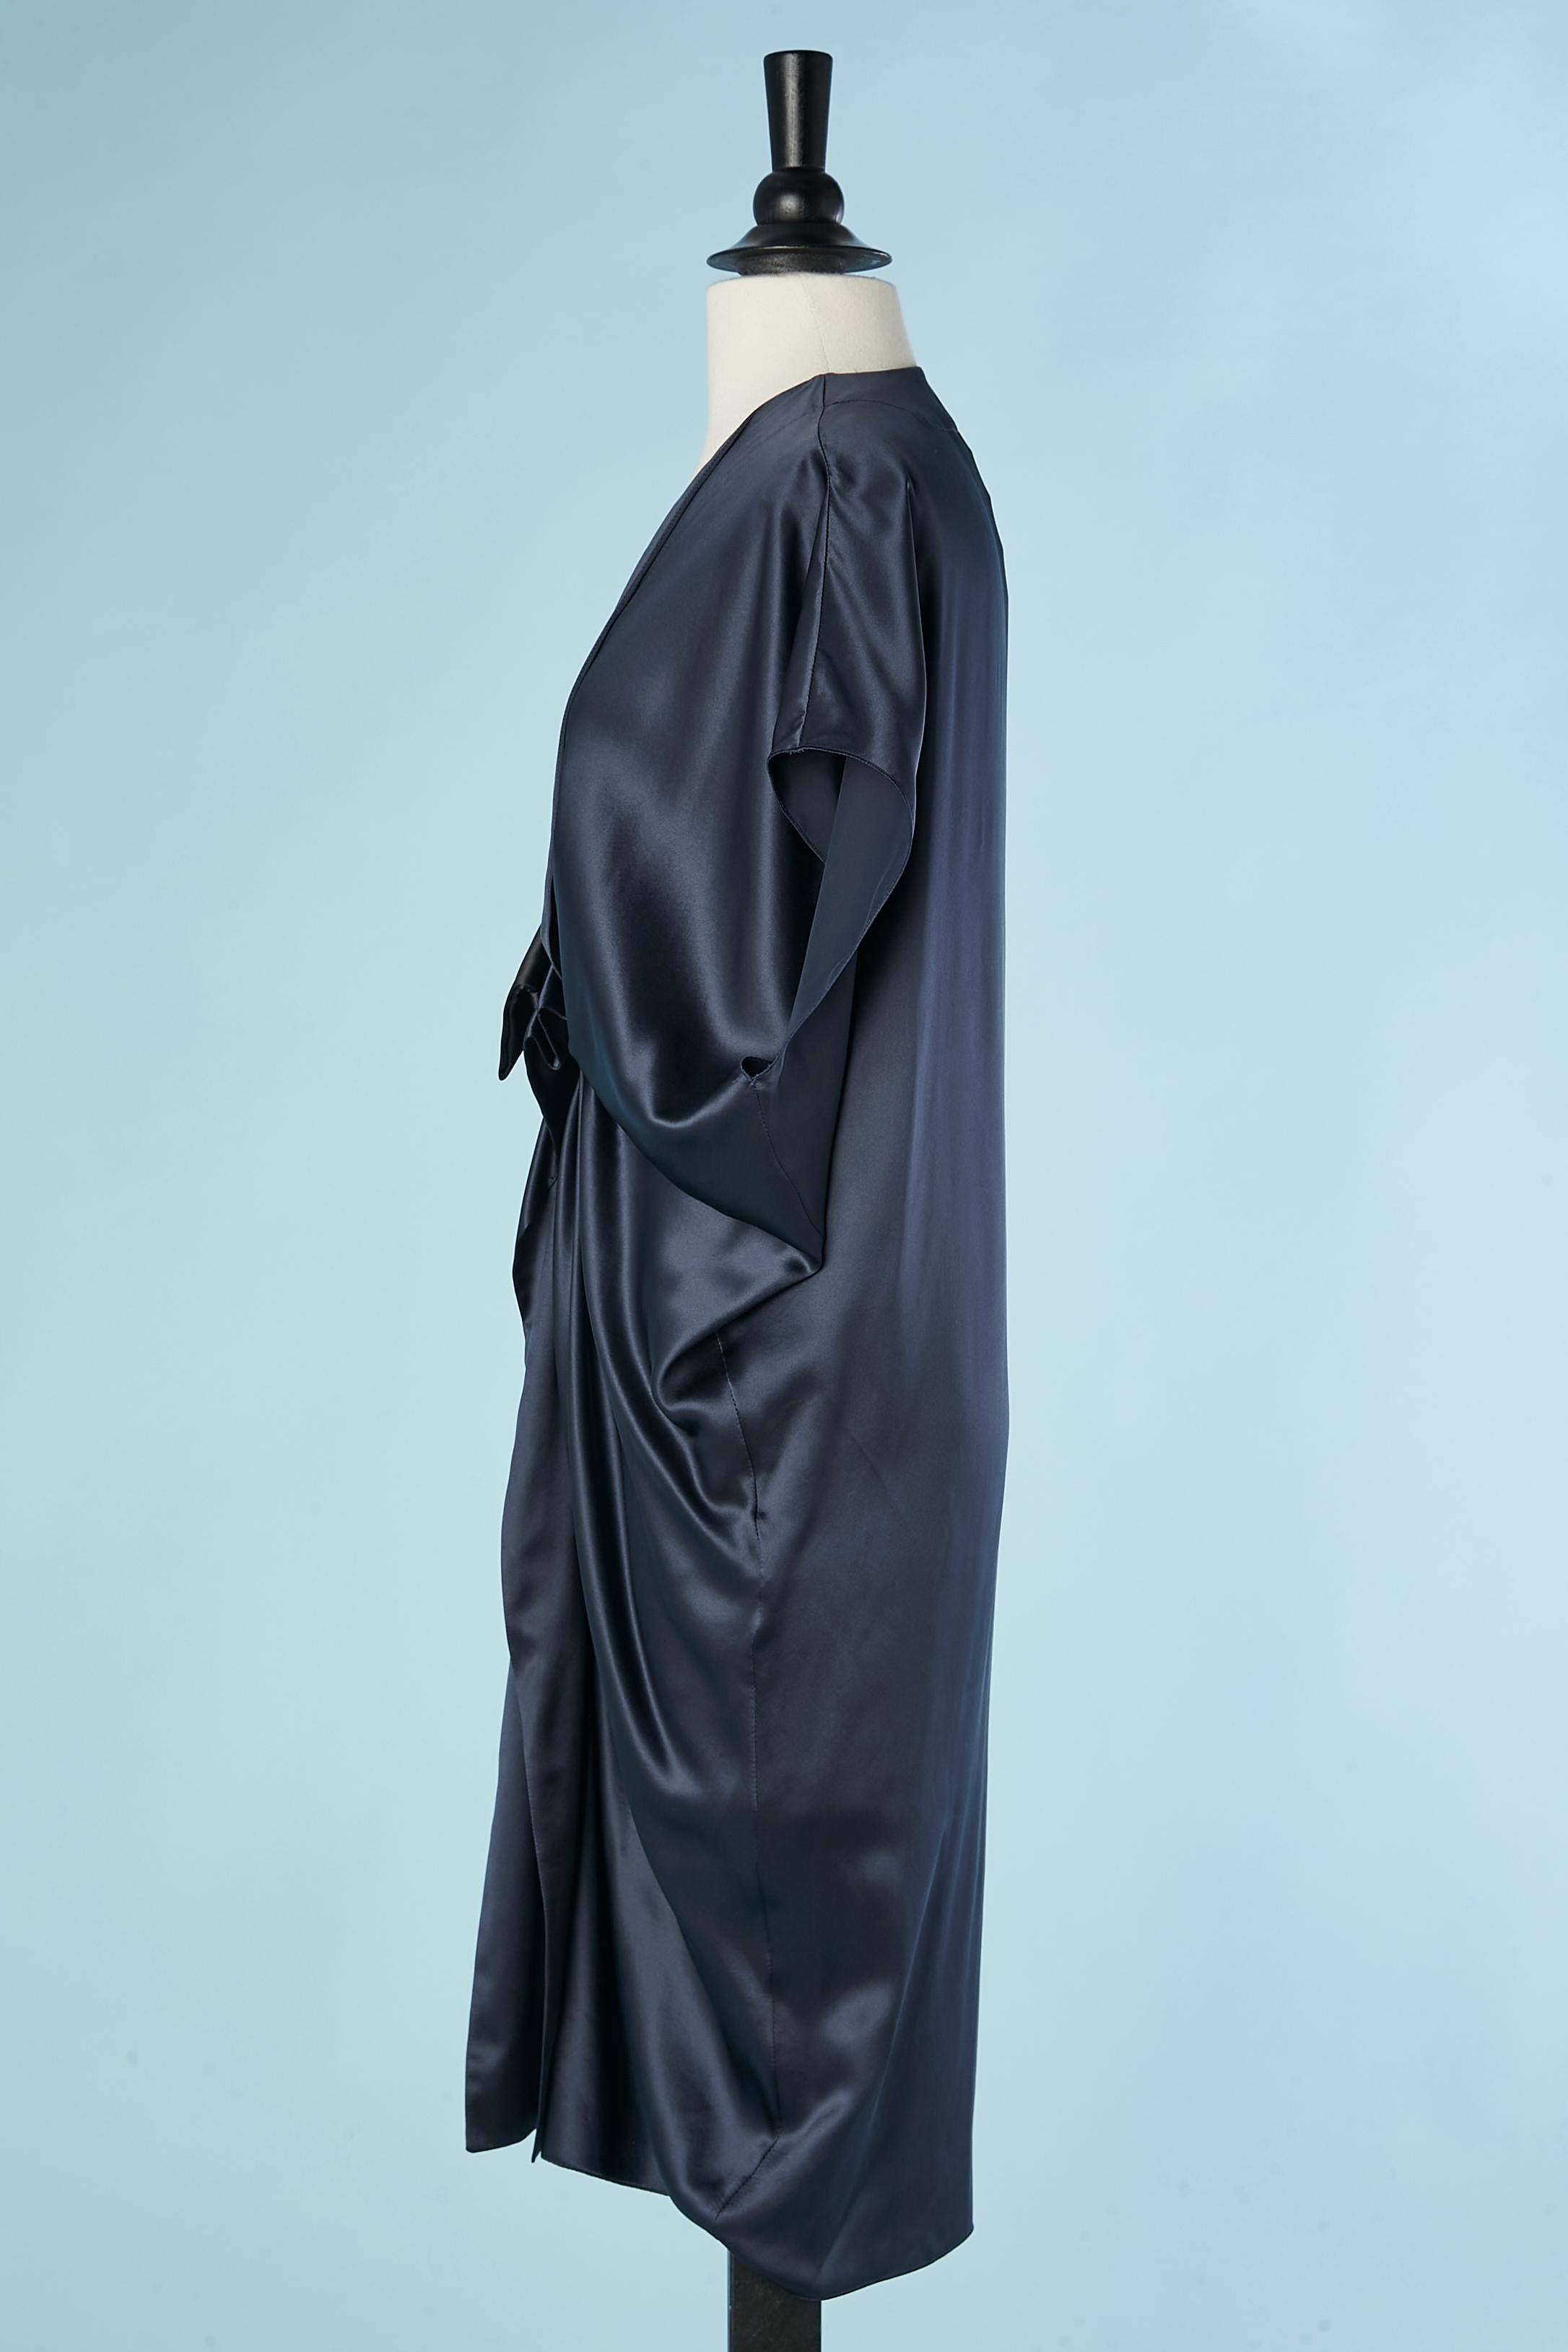 Navy blue draped cocktail dress with black satin bow Lanvin by Alber Elbaz  For Sale 1